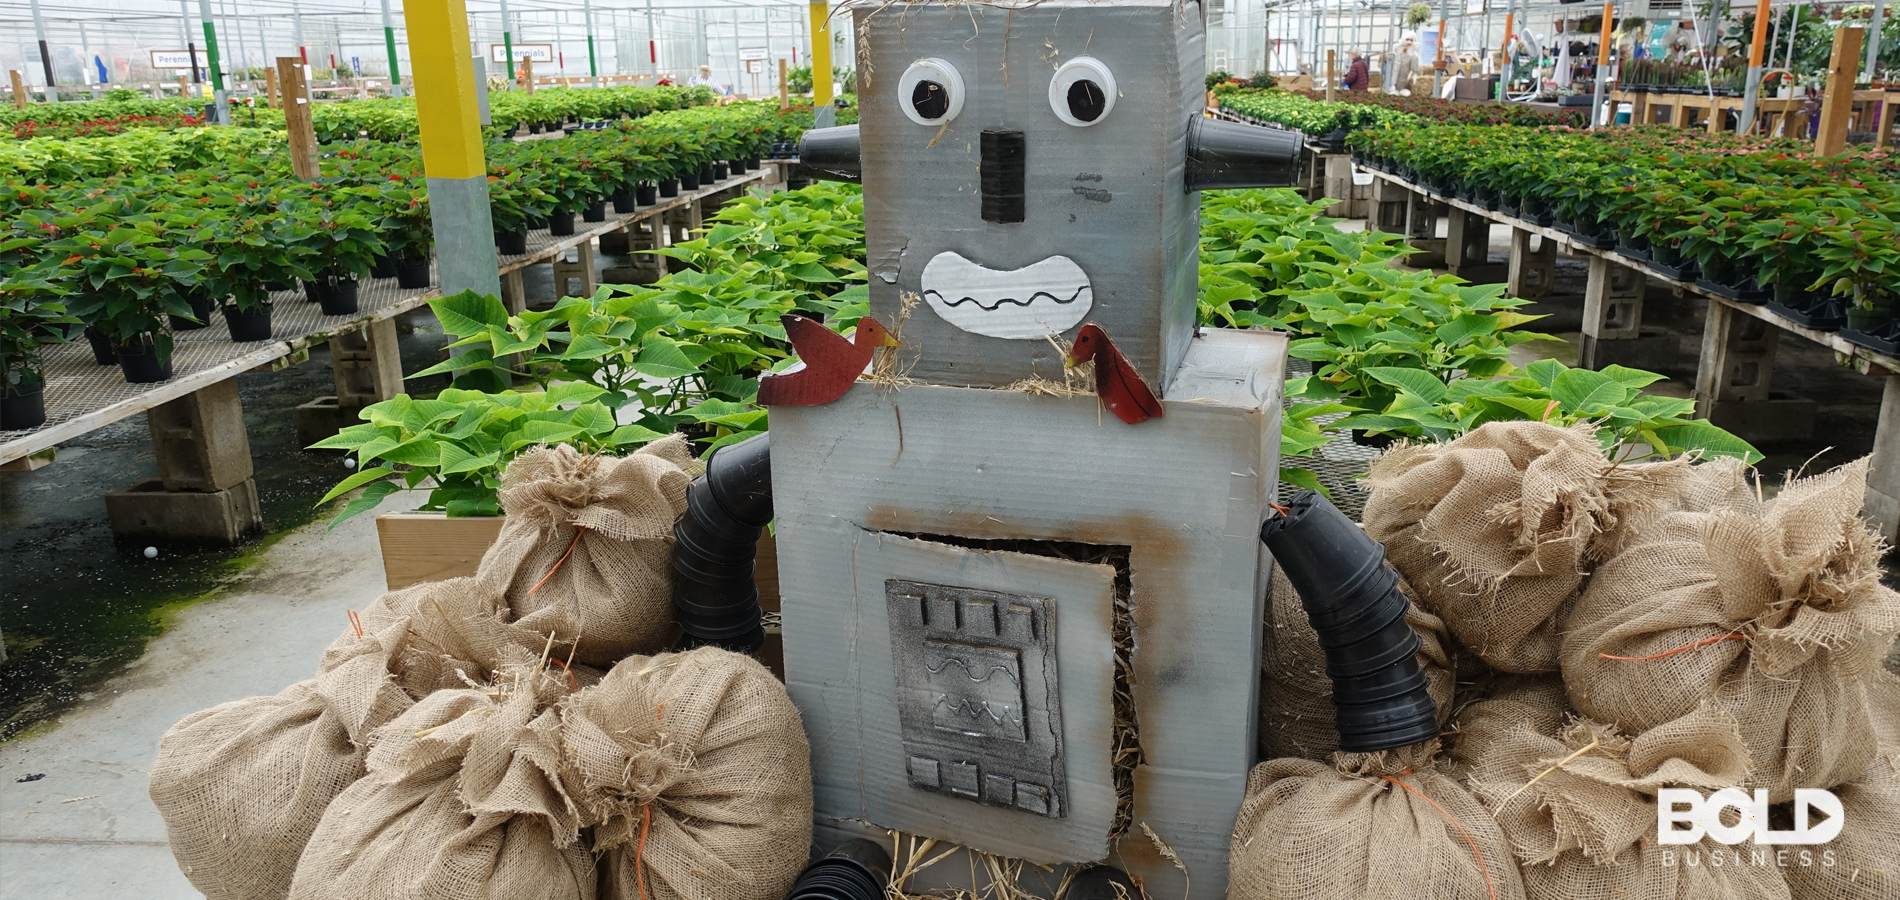 A poorly constructed robotic scarecrow